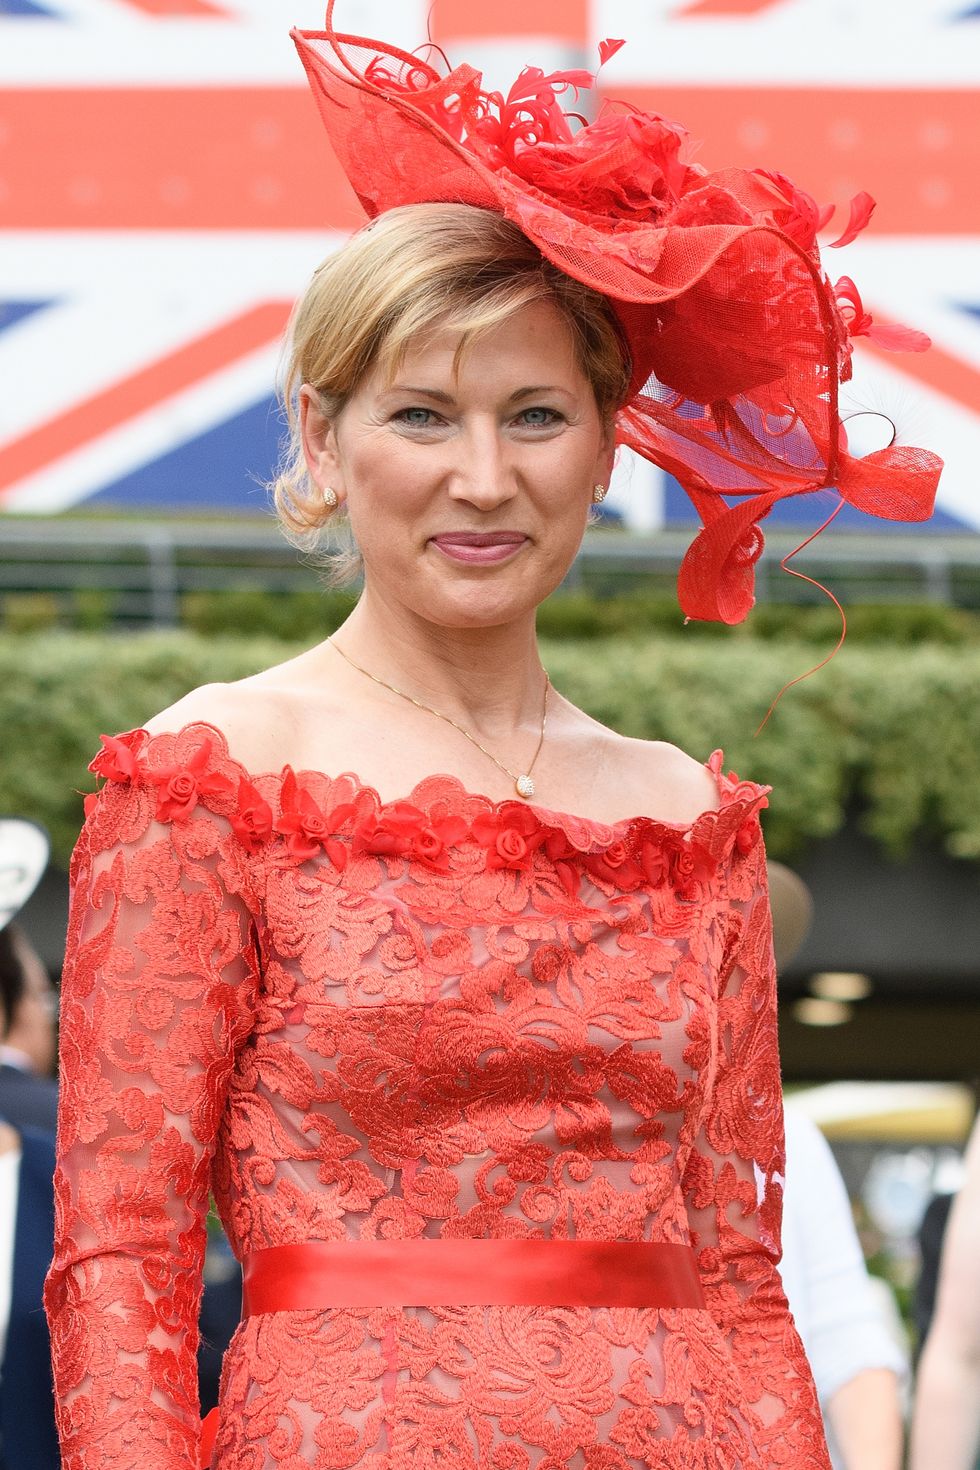 https://hips.hearstapps.com/hmg-prod.s3.amazonaws.com/images/hbz-royal-ascot-hats-lacry-puravu-gettyimages-978597216-1529432850.jpg?crop=1xw:1xh;center,top&resize=980:*